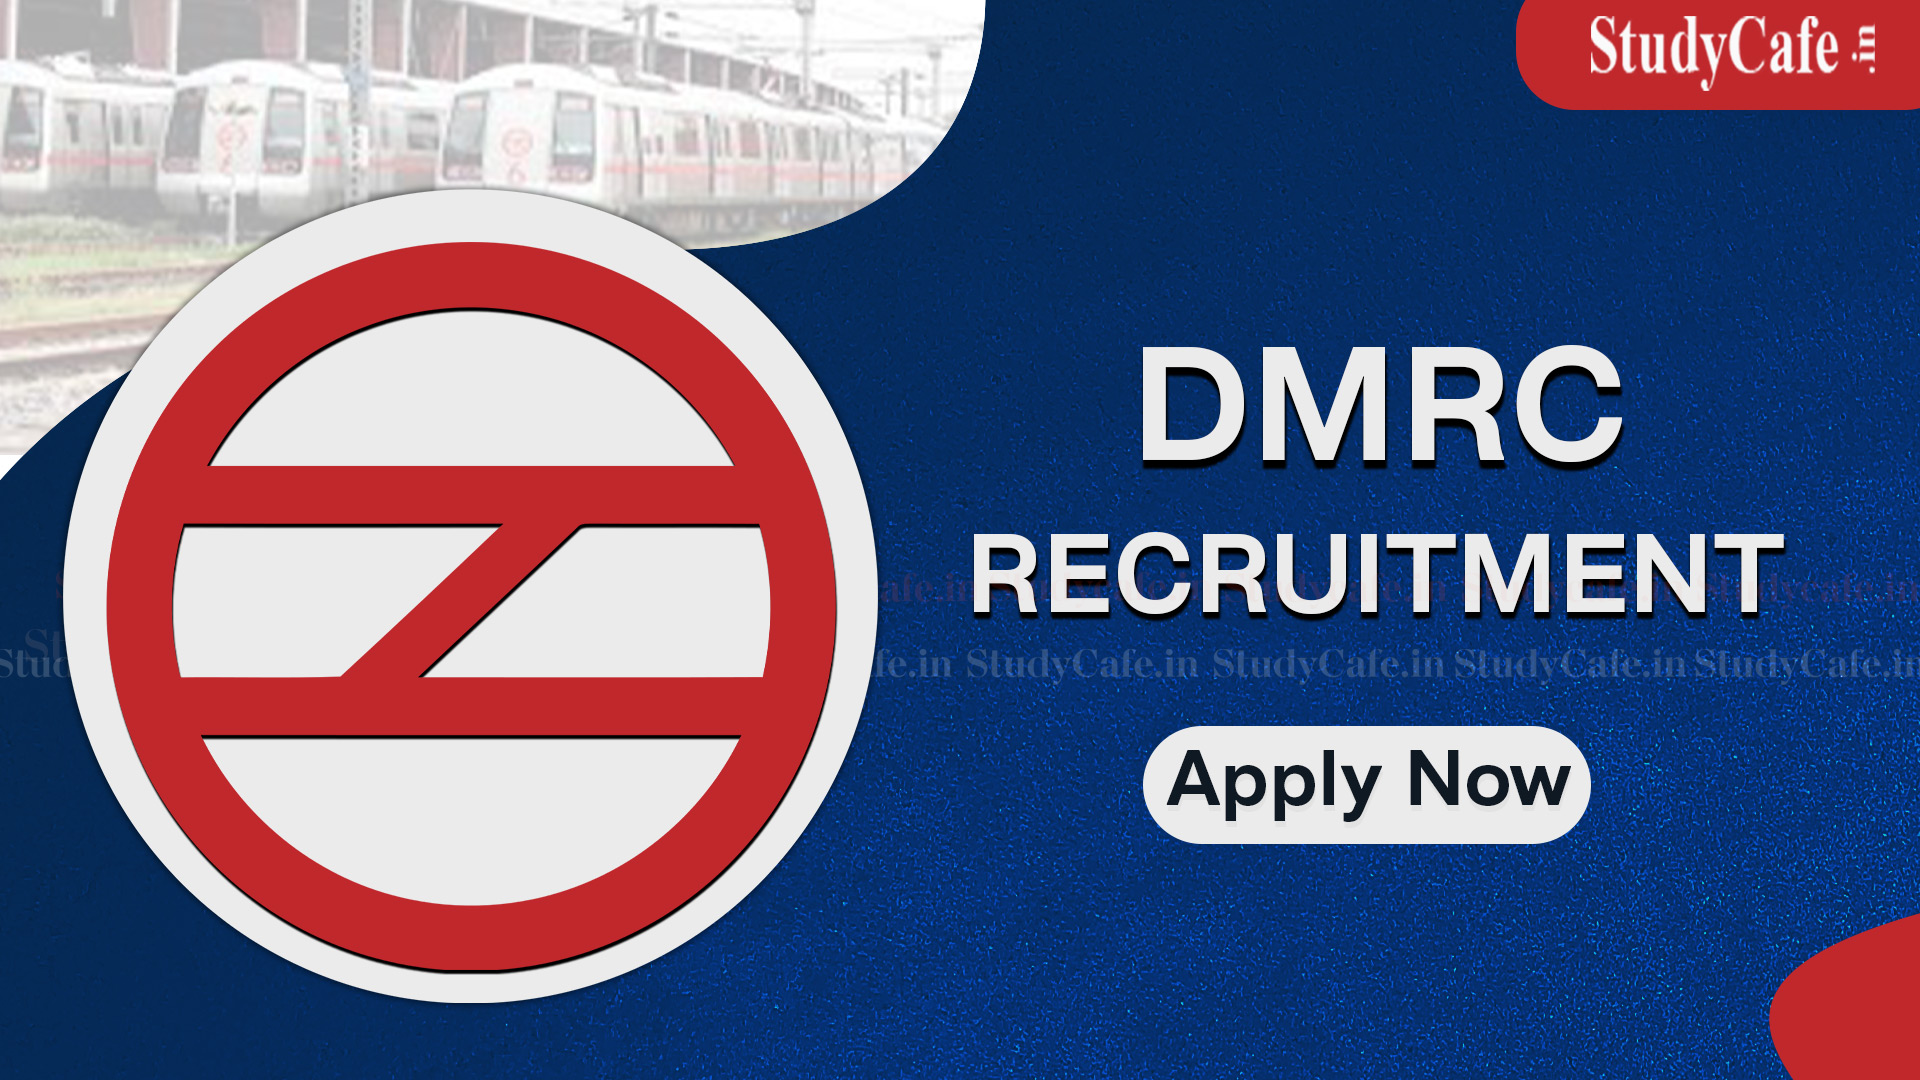 DMRC Recruitment 2022: Salary up to 300000, Check Post, Qualification and How to Apply Here